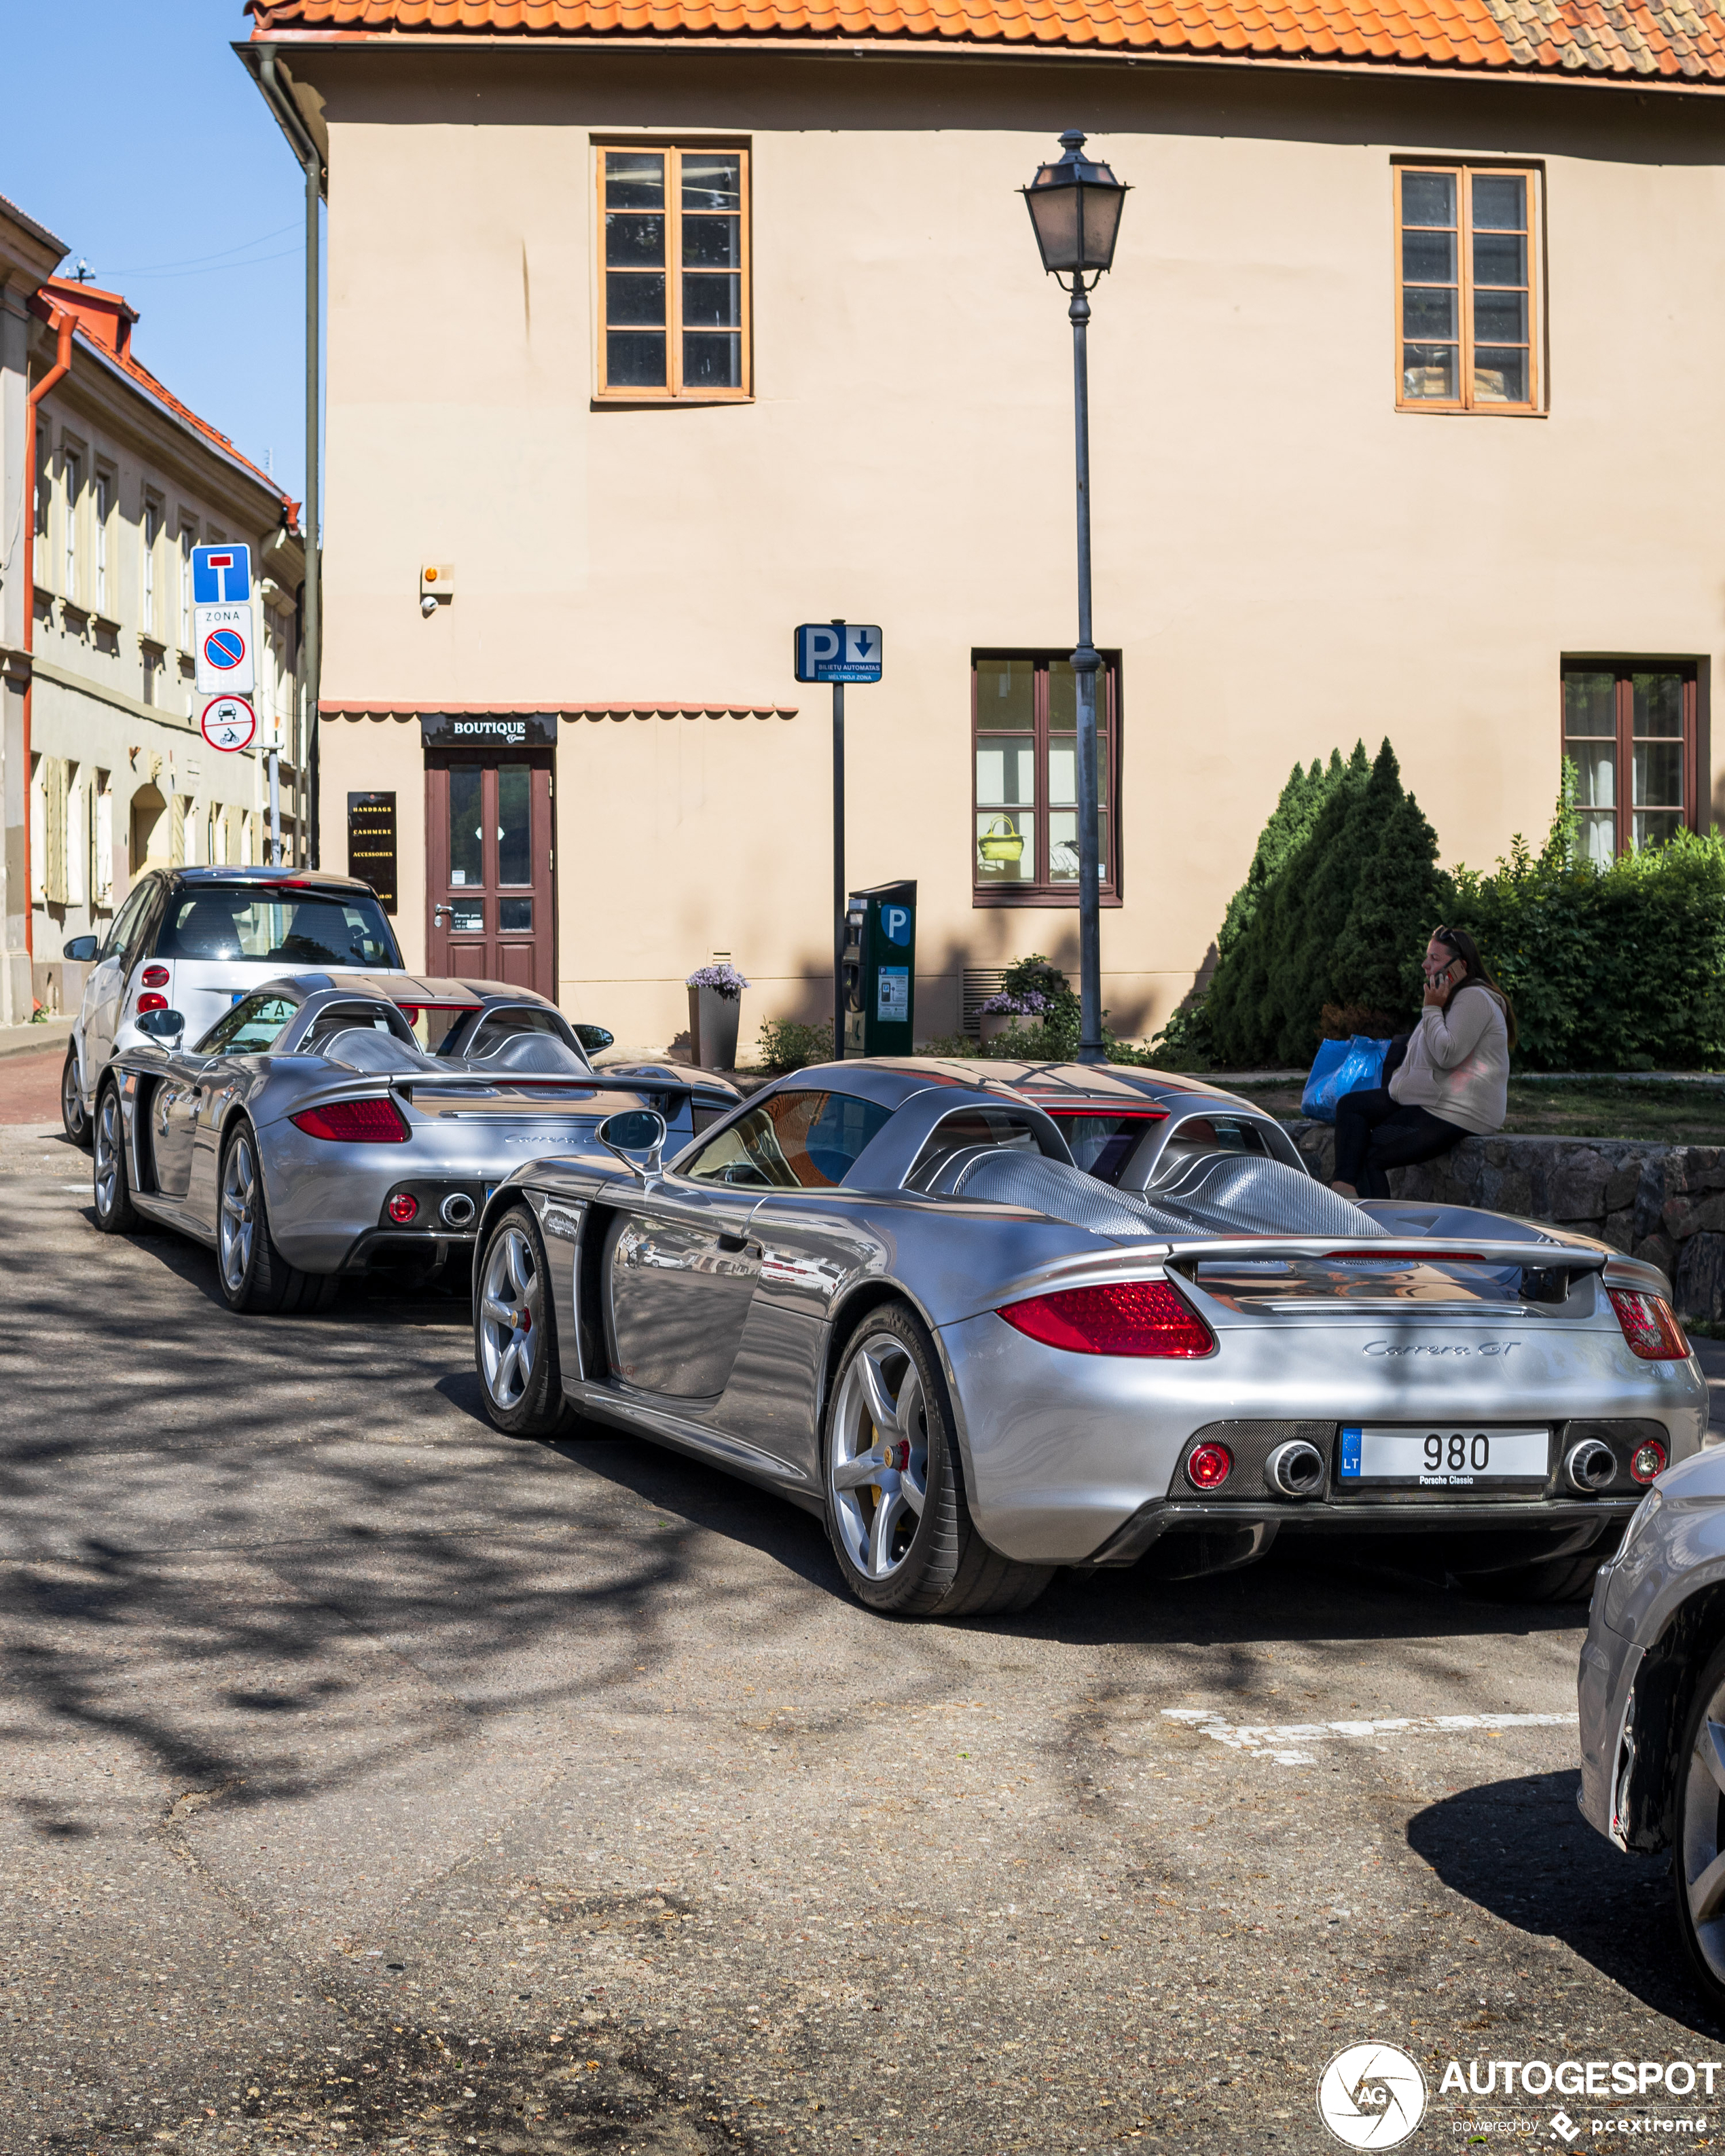 When one Carrera GT is not enough...